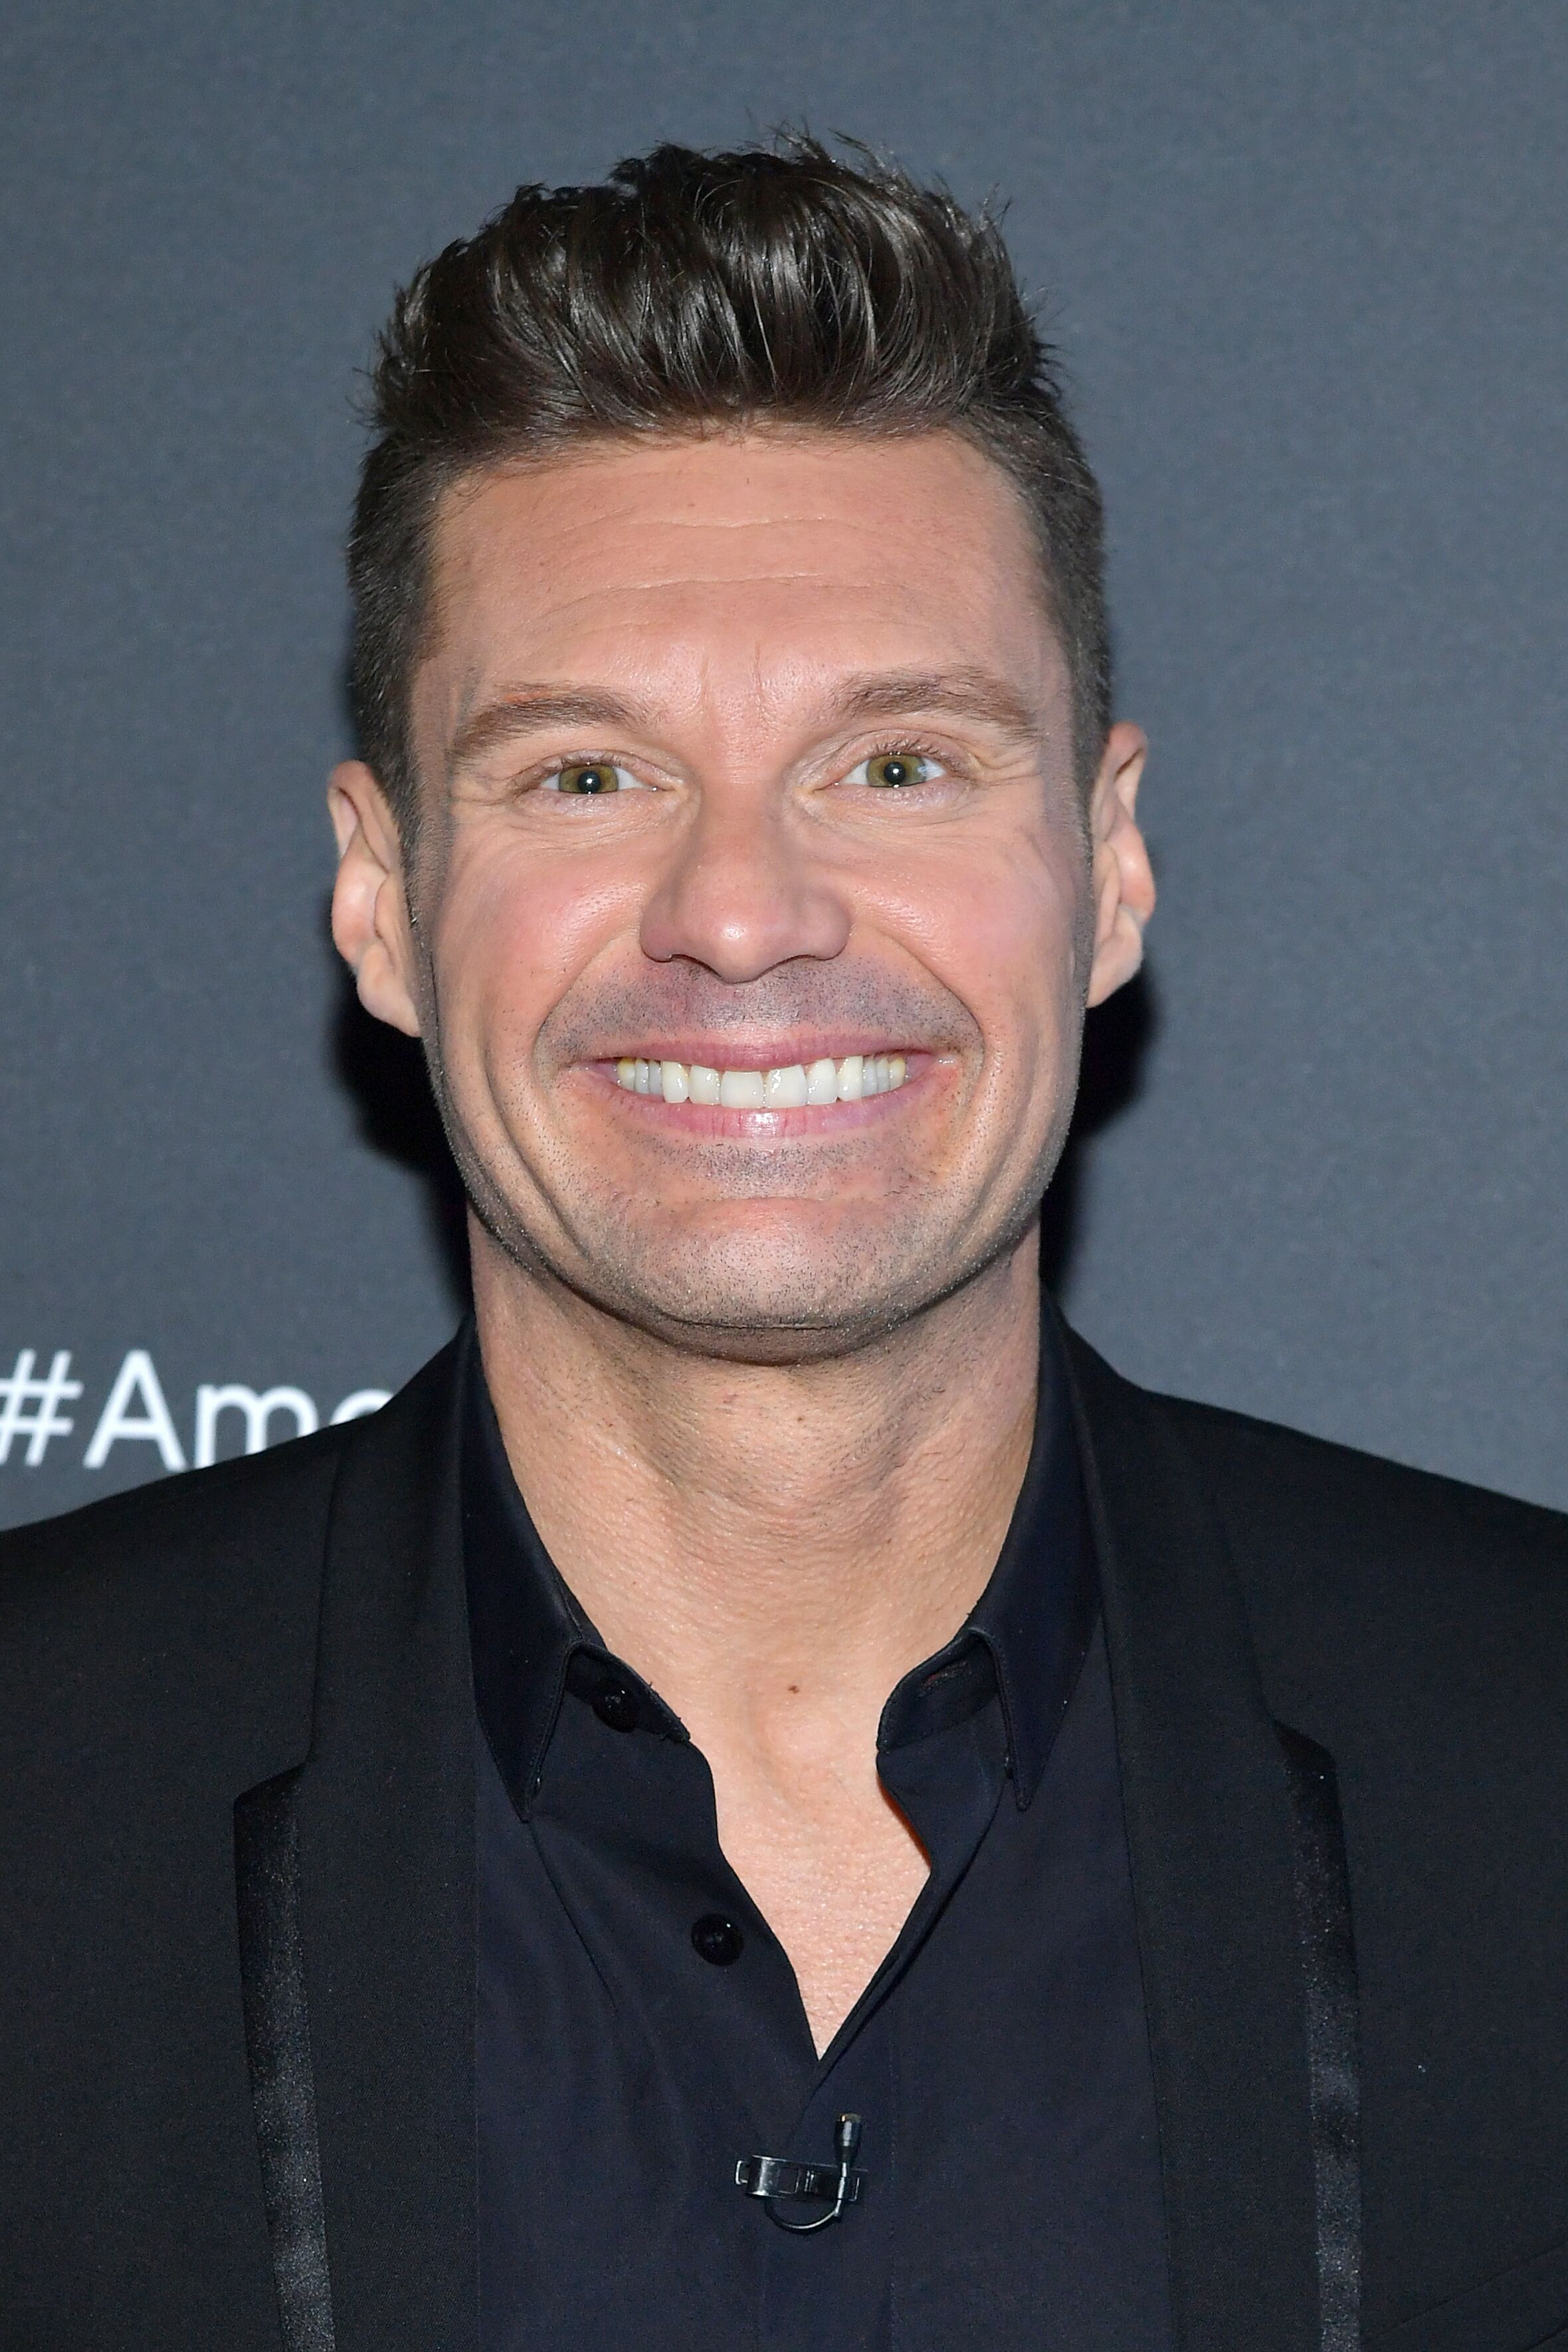 Ryan Seacrest at ABC's American Idol live show on May 12, 2019 in Los Angeles, California. | Source: Getty Images